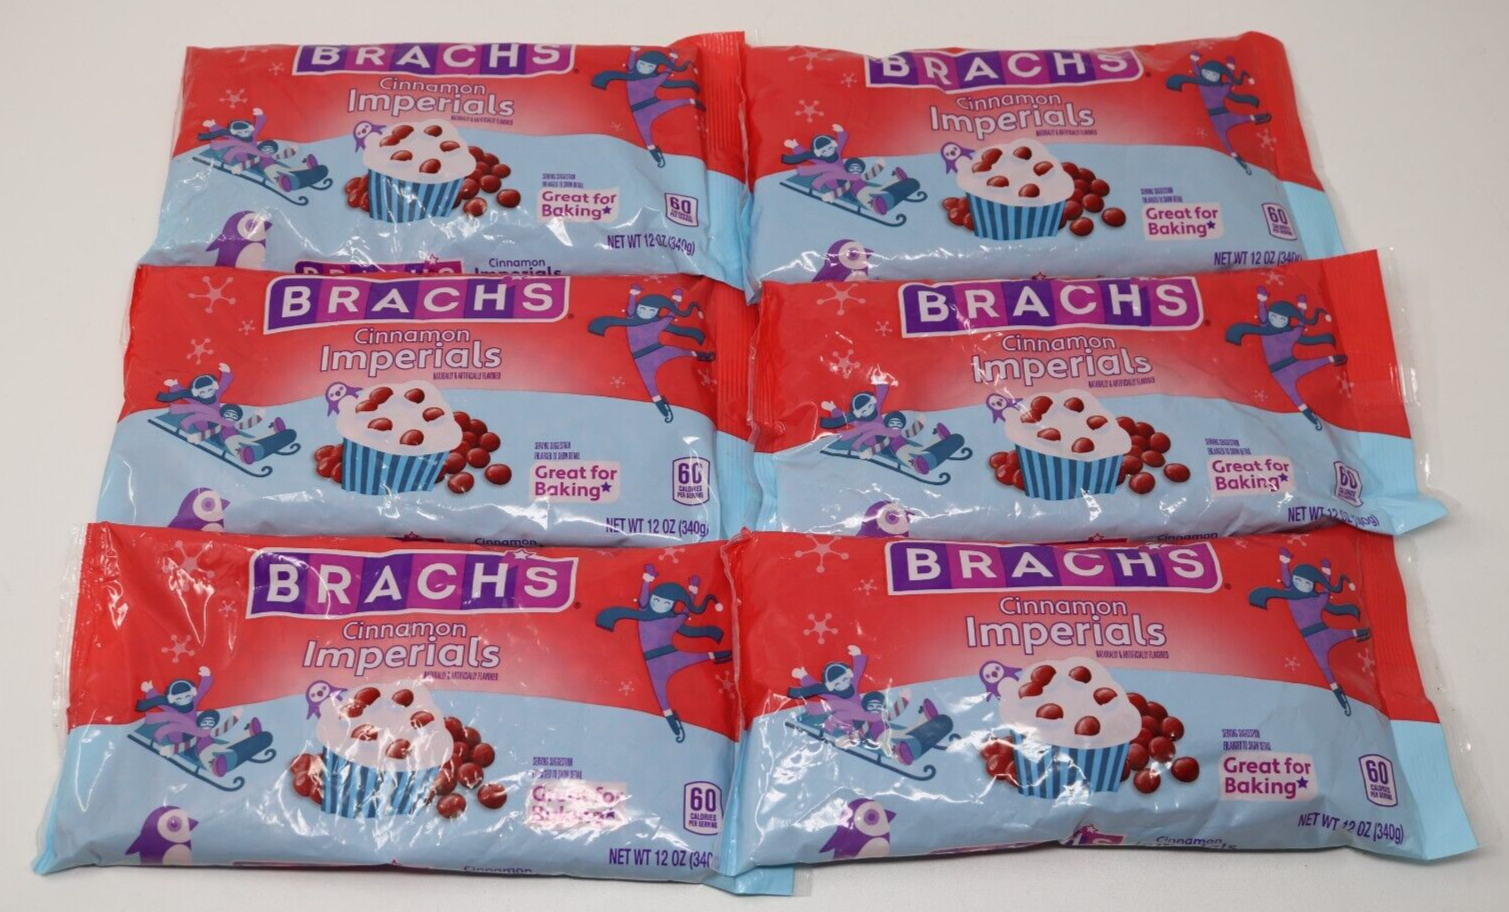 Primary image for Brach's Cinnamon Imperials Baking Candy Flavored 12oz Bags BB 08/25 Lot of 6